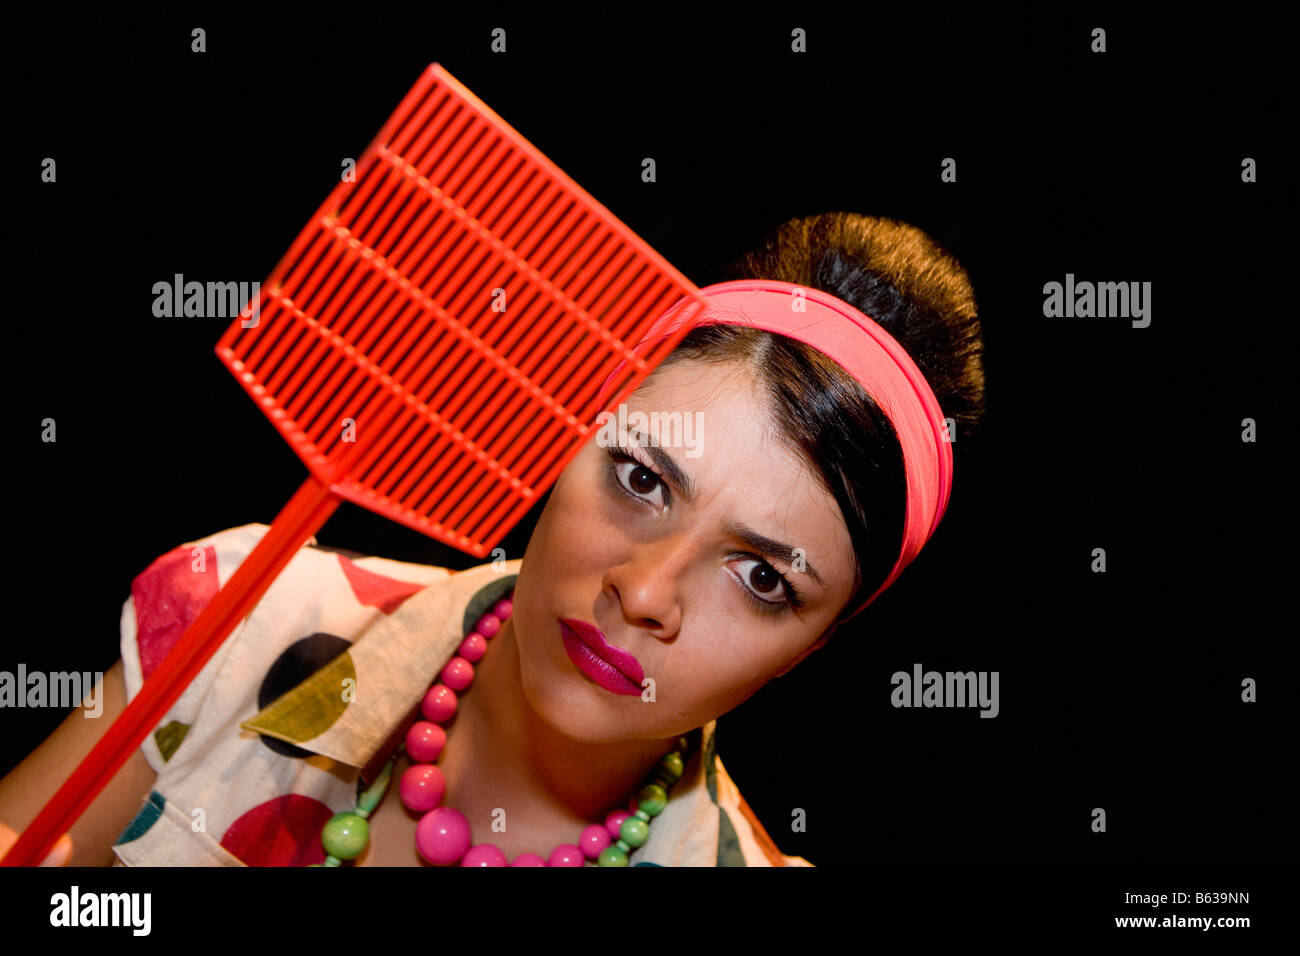 Portrait of a young woman holding a fly swatter Stock Photo